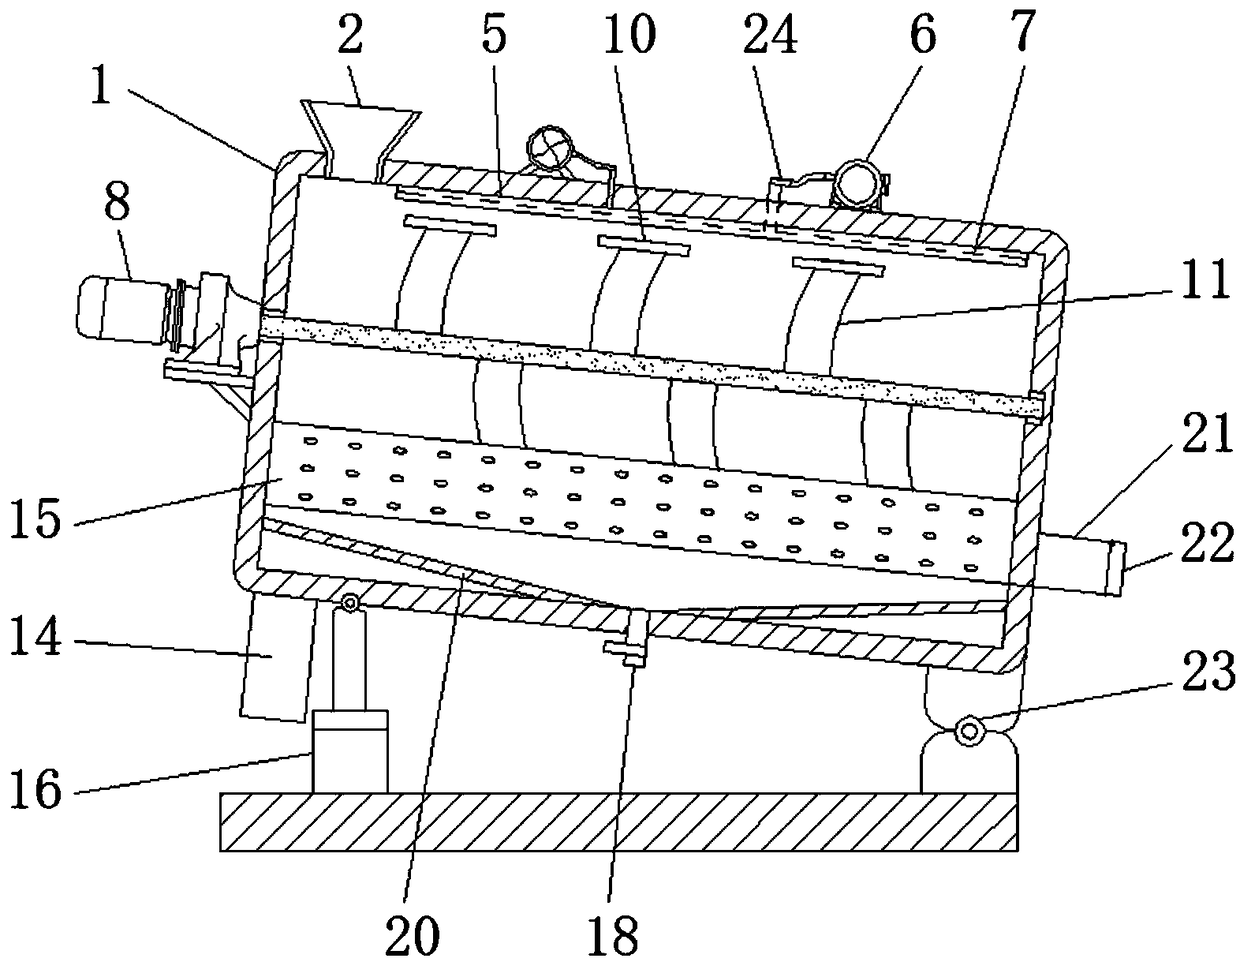 Cleaning device with drying function and used for selenium-rich agricultural product processing